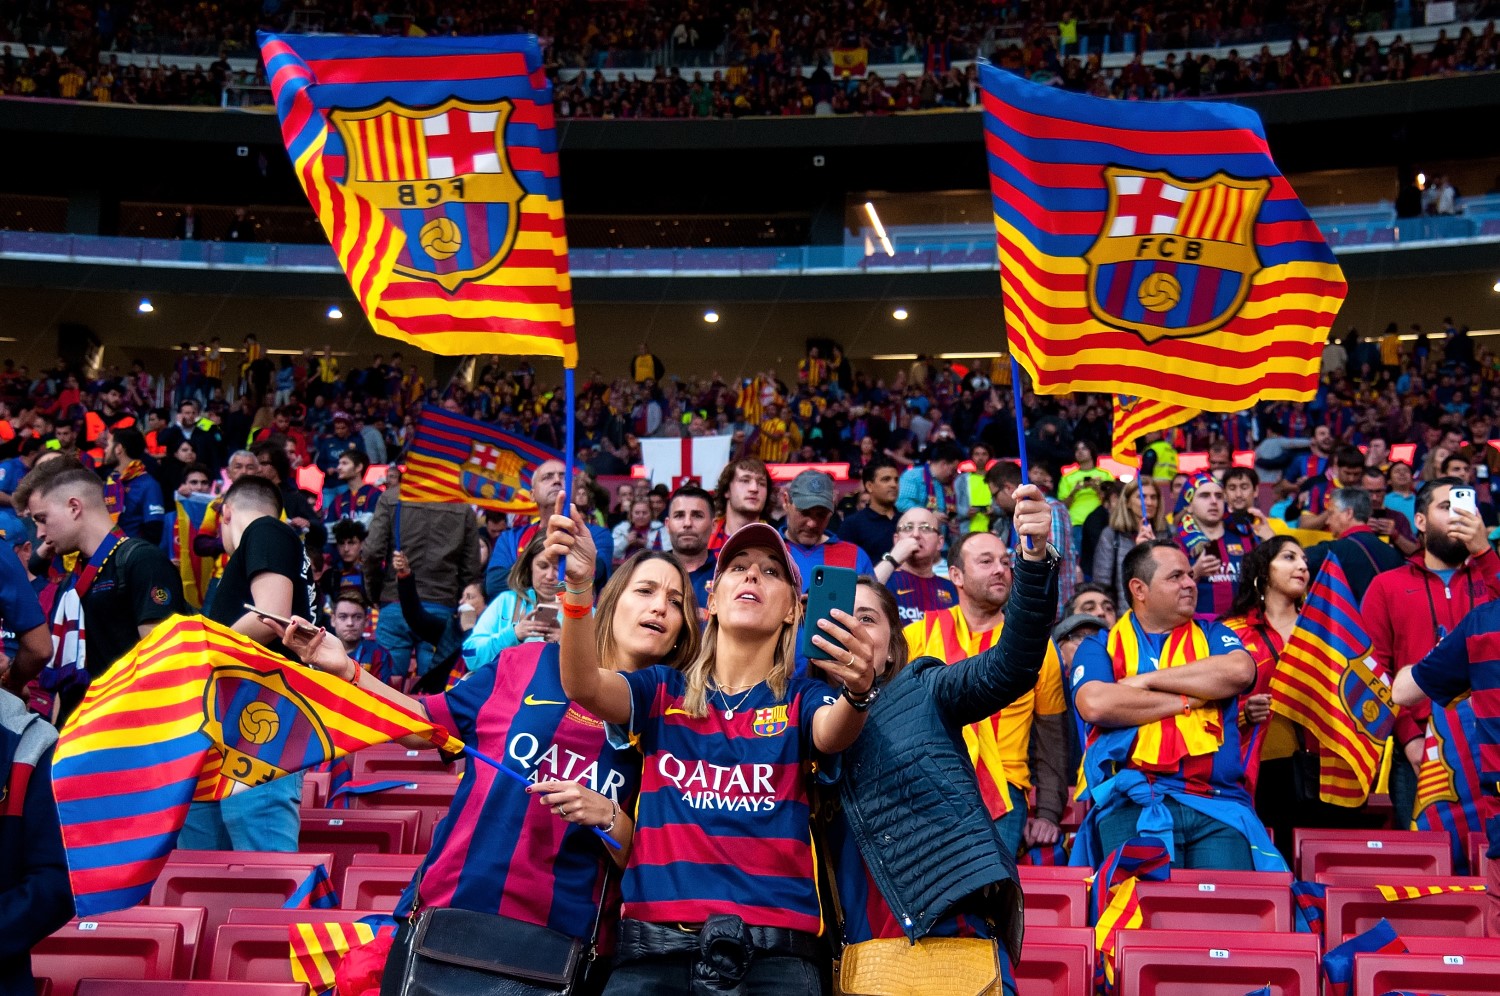 Top Soccer Club FC Barcelona Launching Crypto Token Fan Engagement - CoinDesk